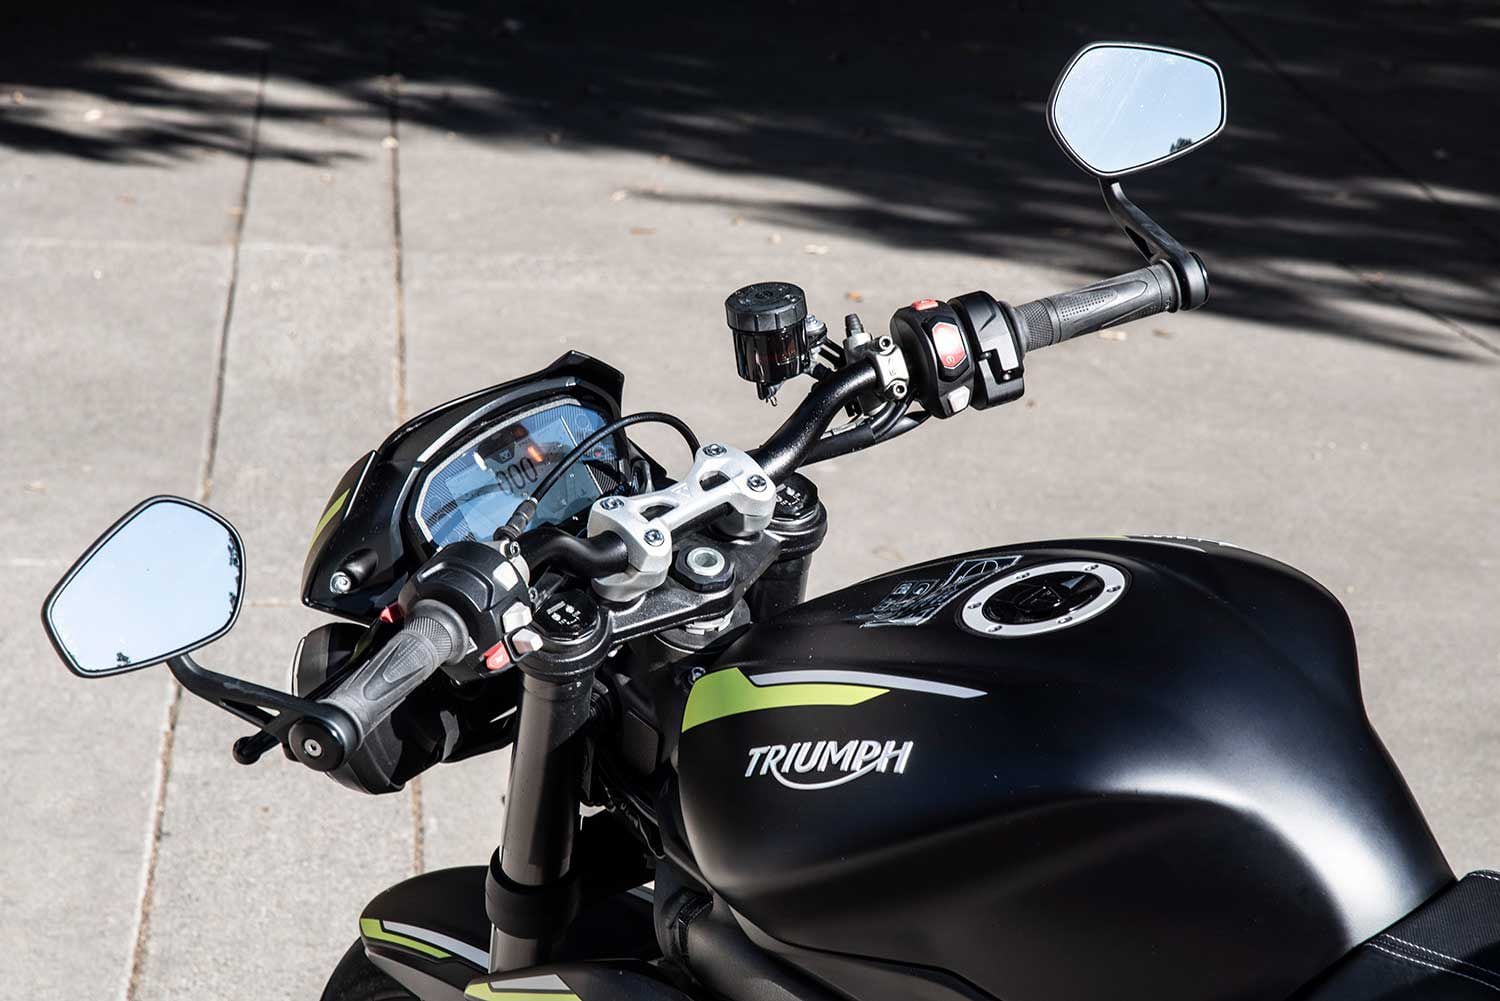 The Street Triple’s cockpit is clean and unpretentious, though the instrument screen’s menu structure and graphics can be complicated— at least it can be angled to avoid glare.